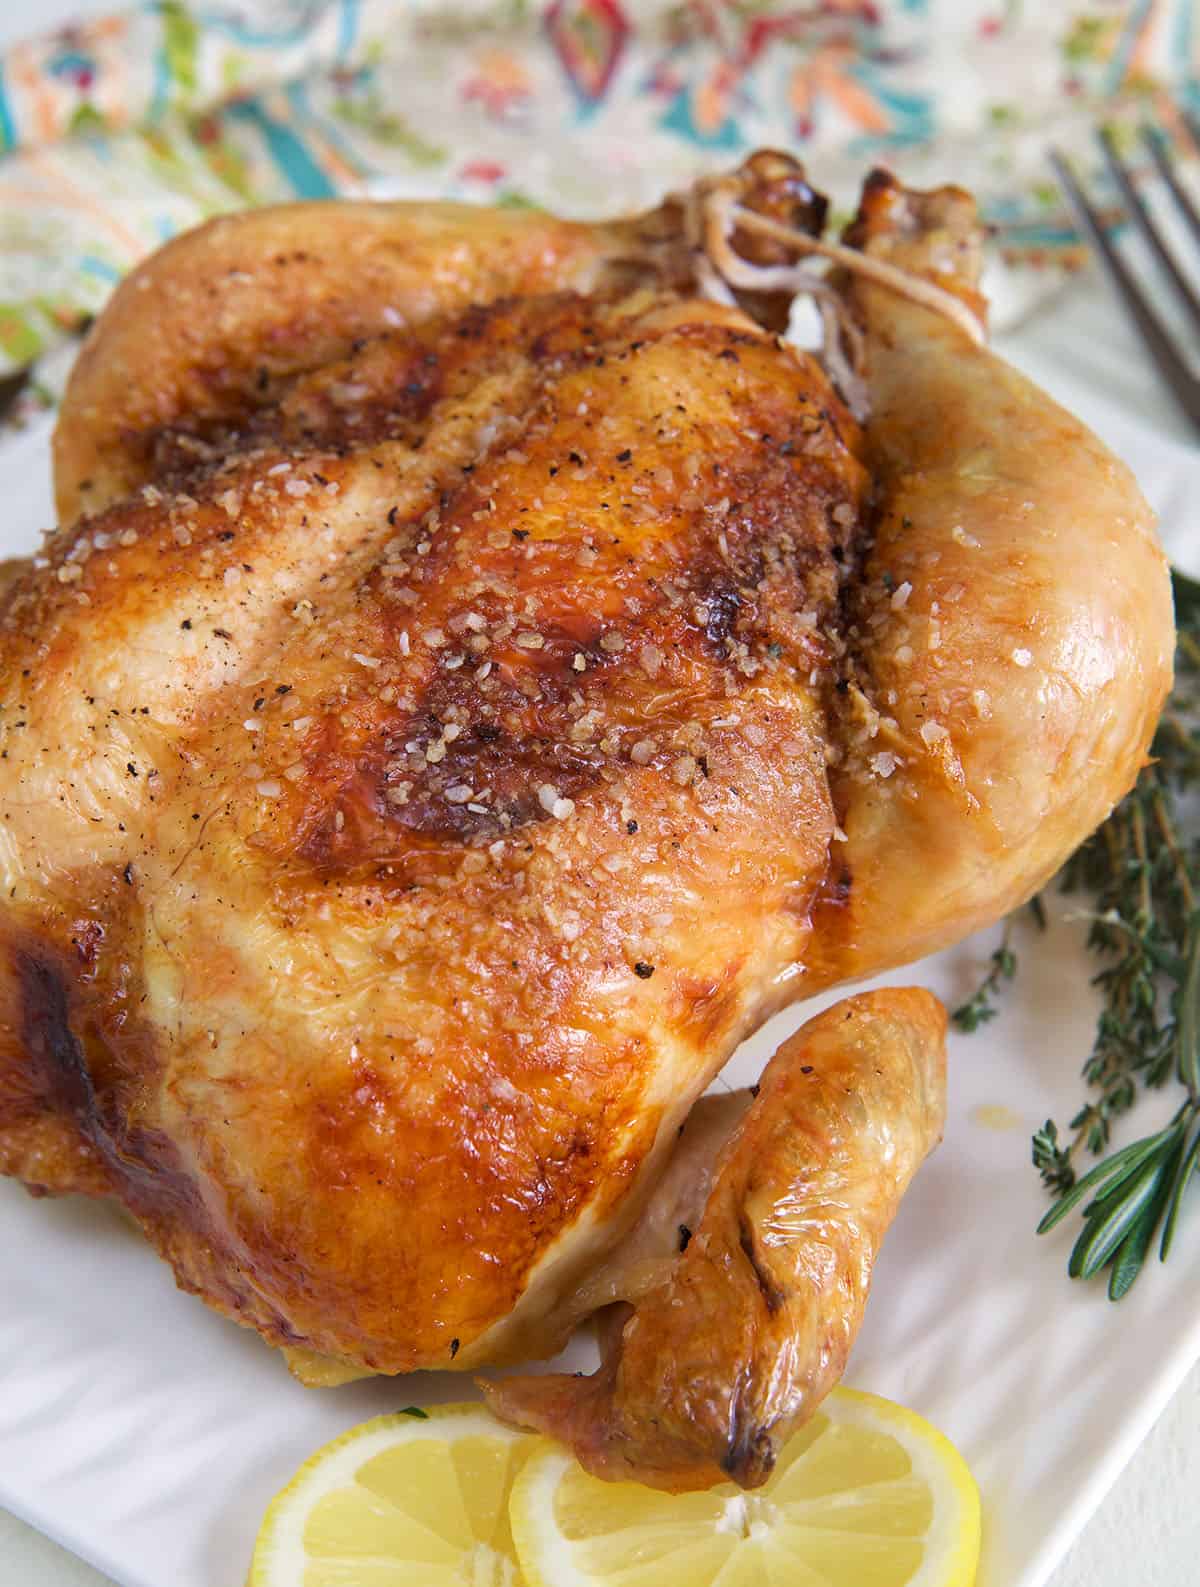 A whole cooked chicken is presented with fresh lemon slices and herbs.